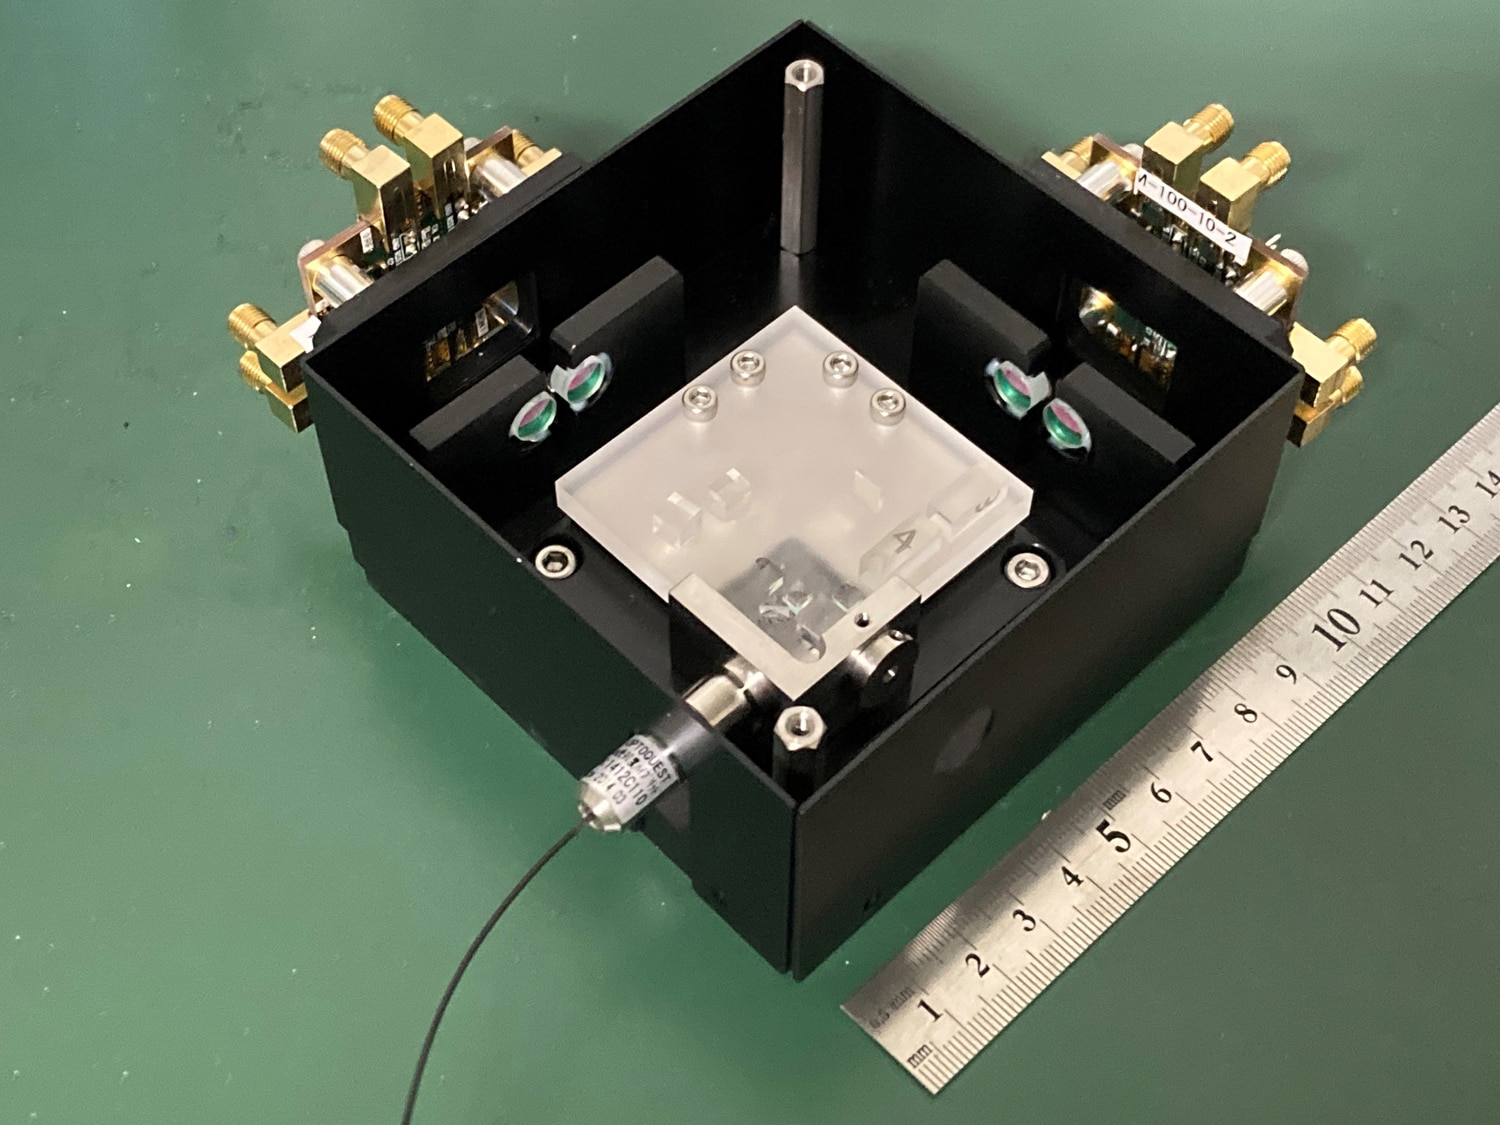 Optical receiver prototype for laser communication terminal (LCT)